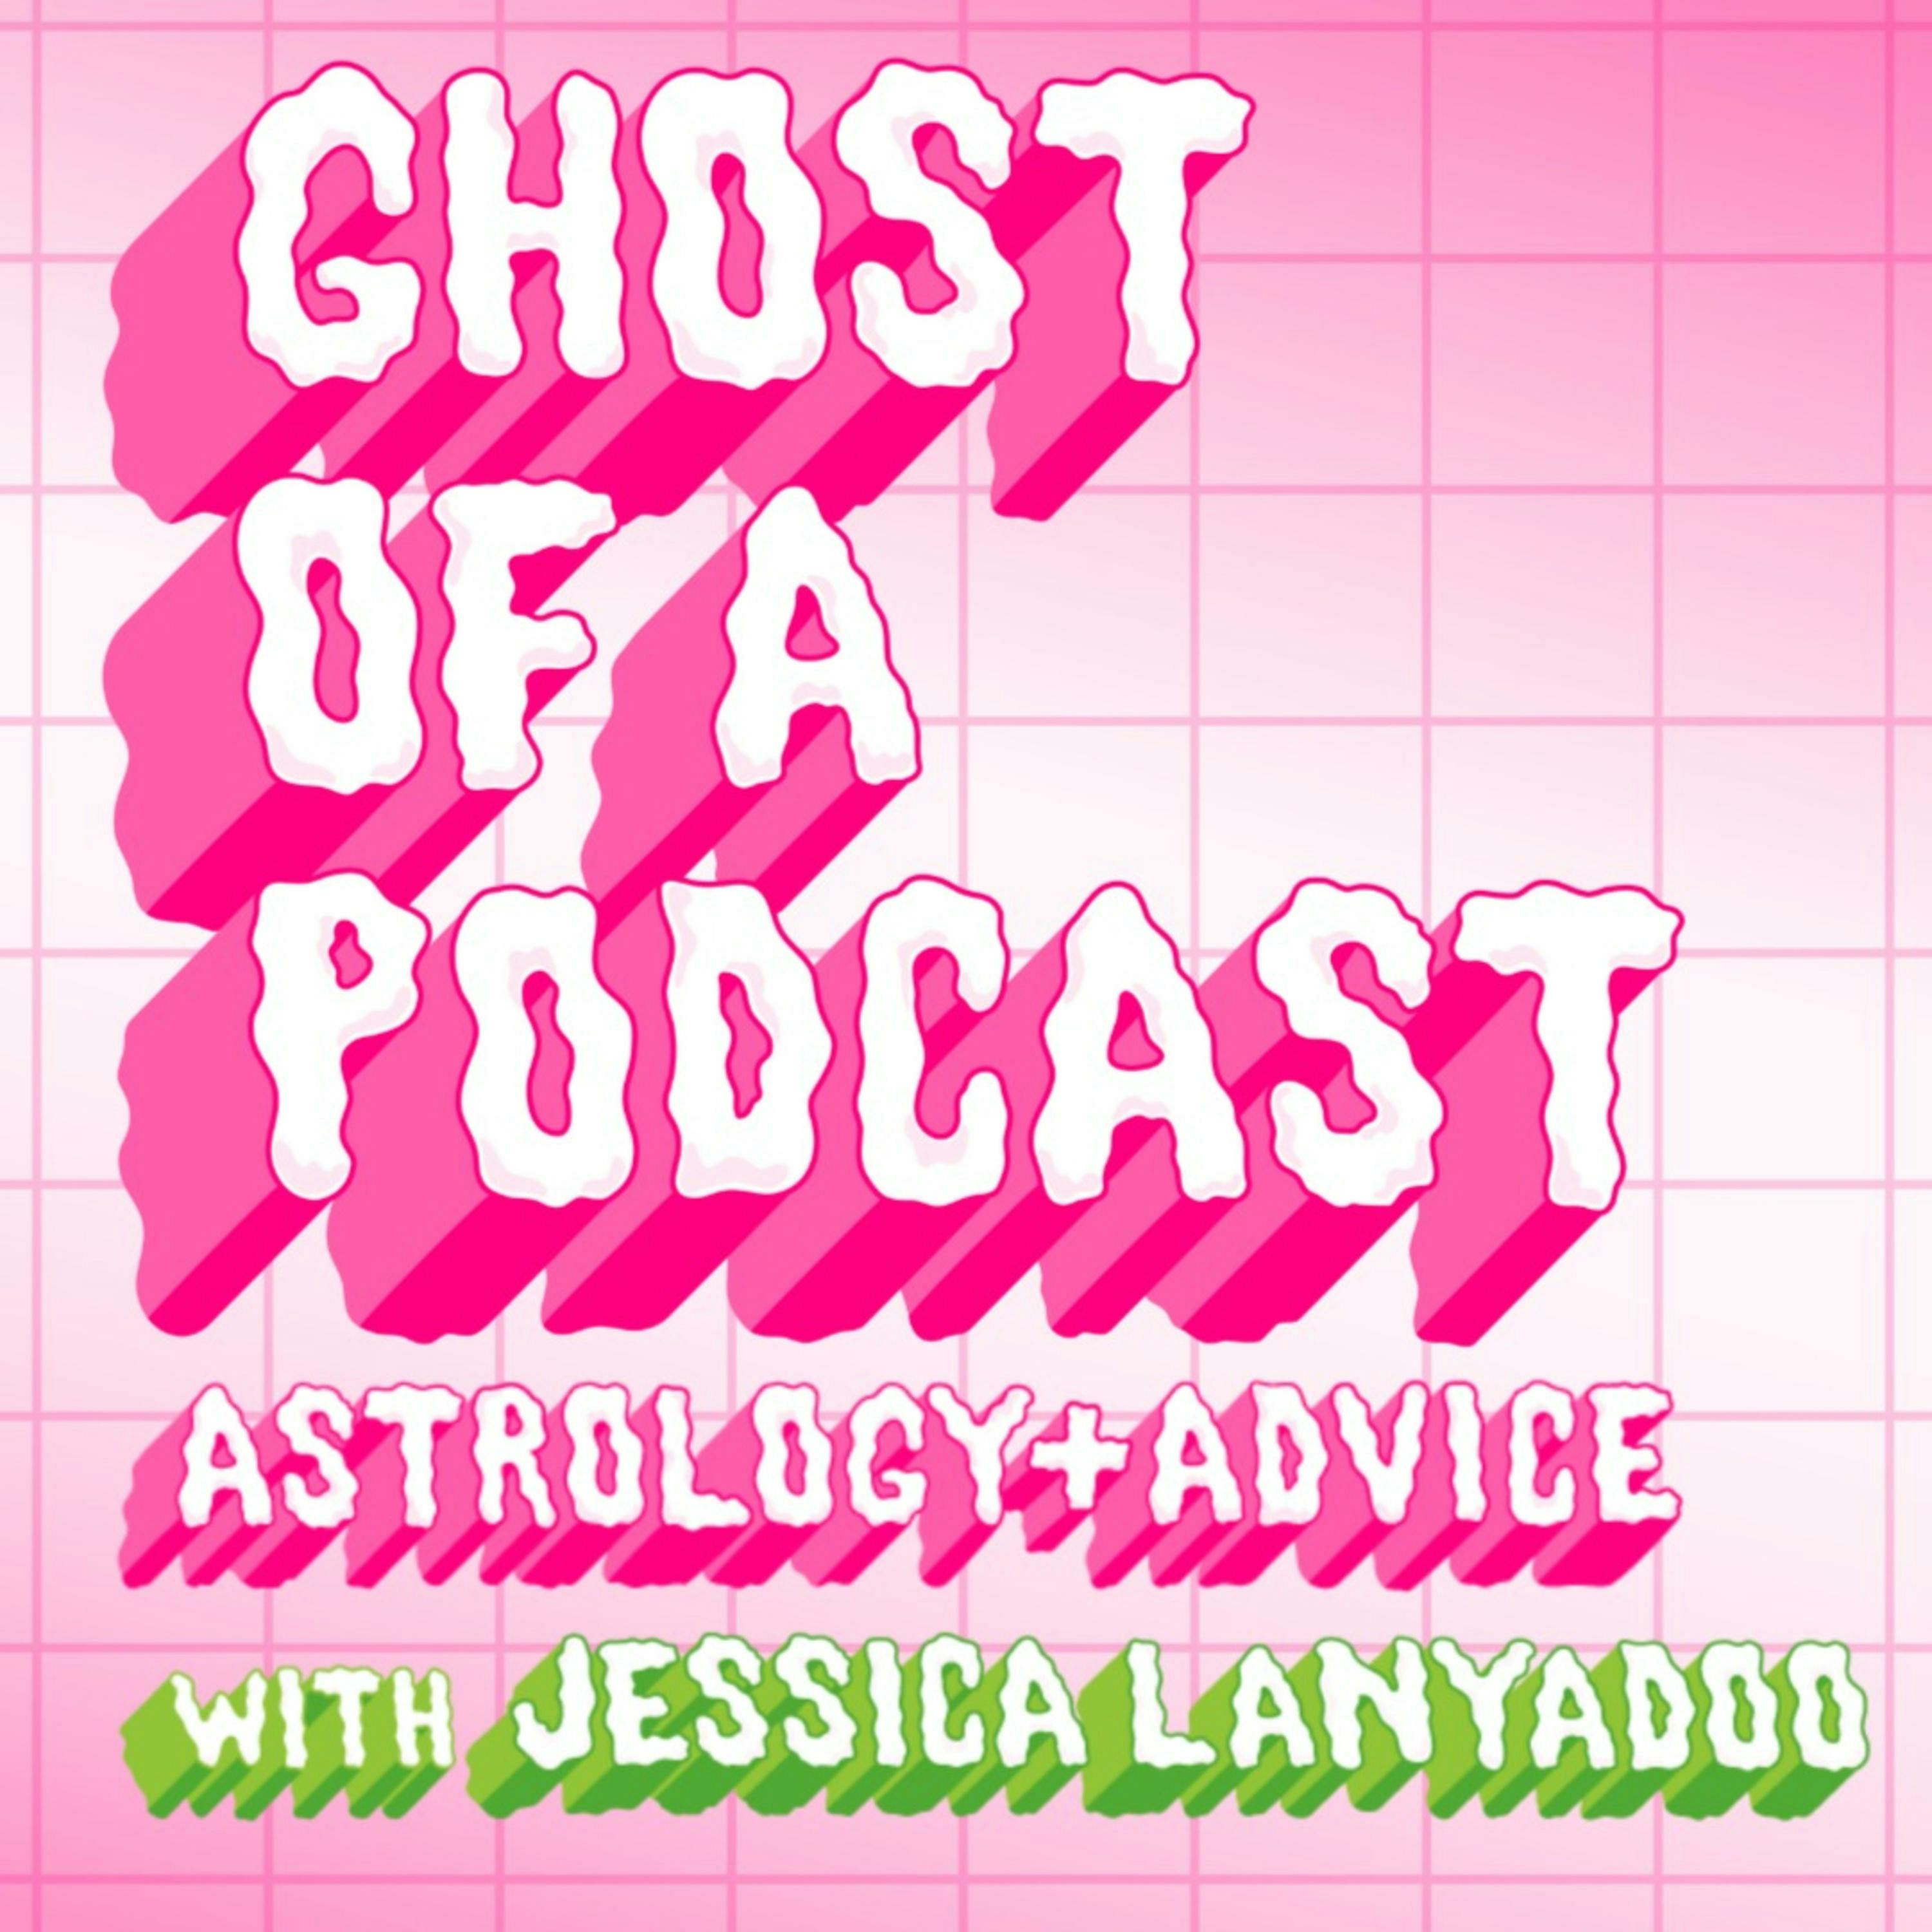 185: The Moon Made Me + Astrology